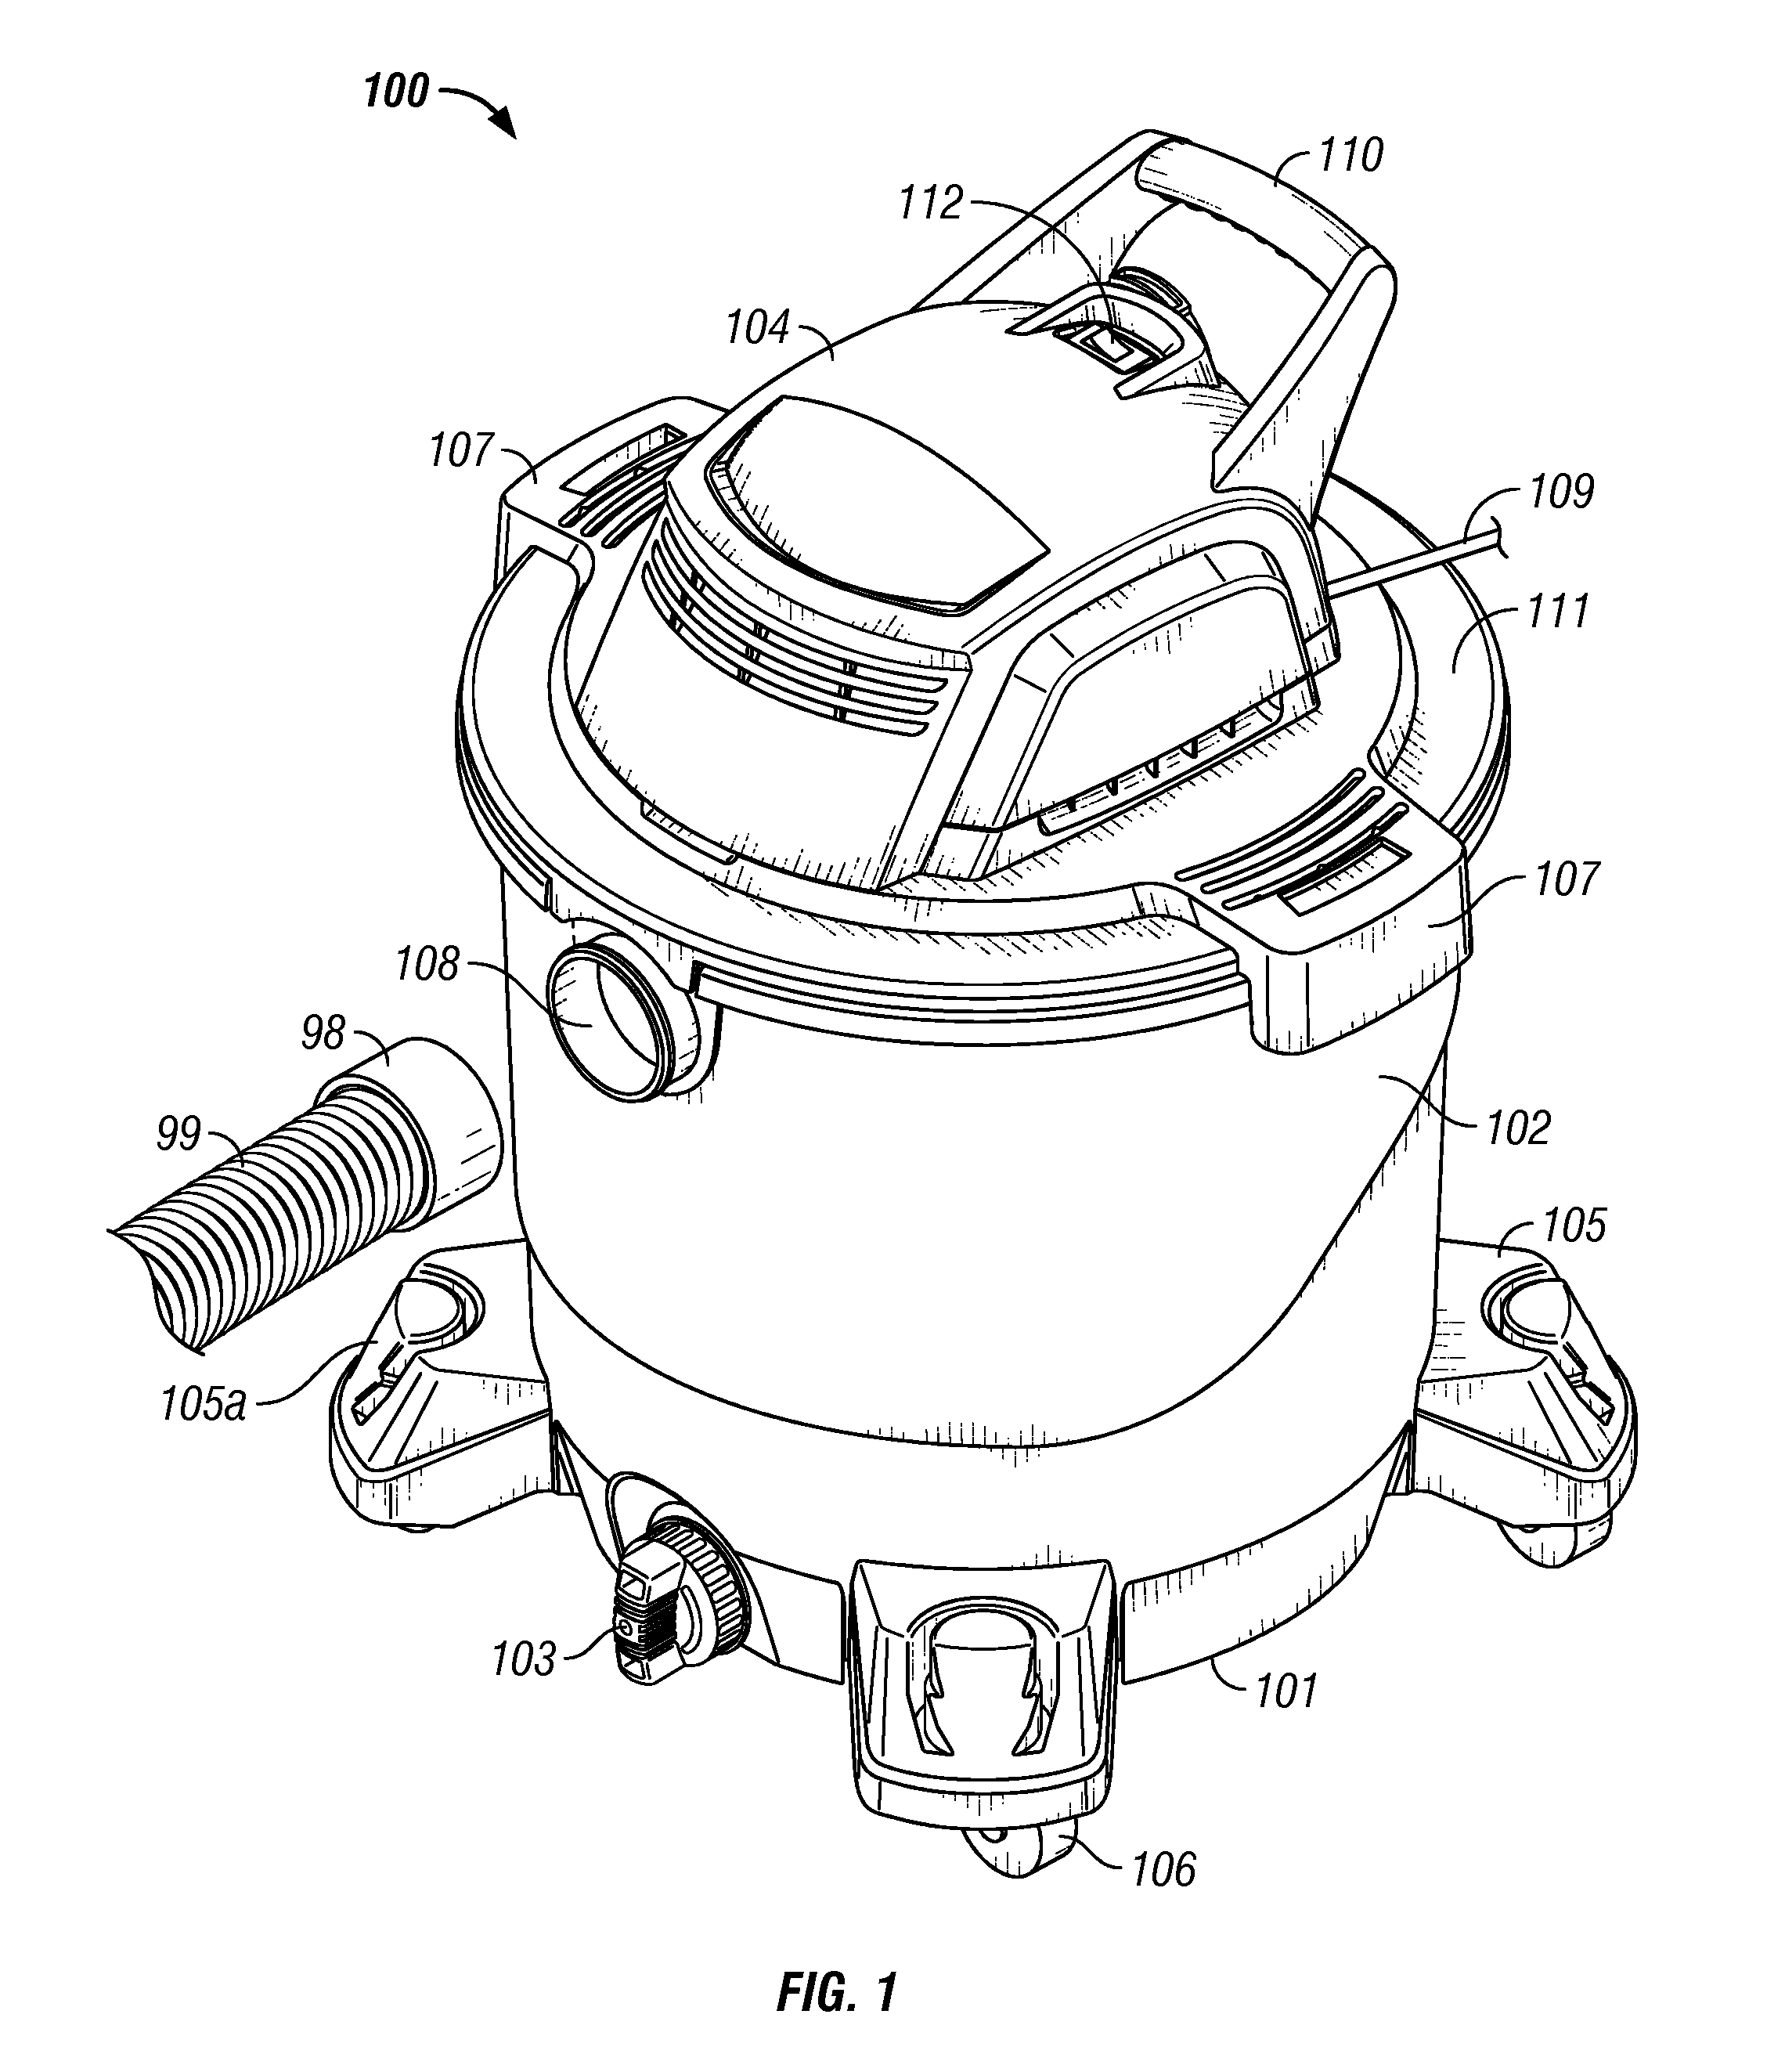 Vacuum Bypass Vent and Vacuums Incorporating Such Bypass Vents